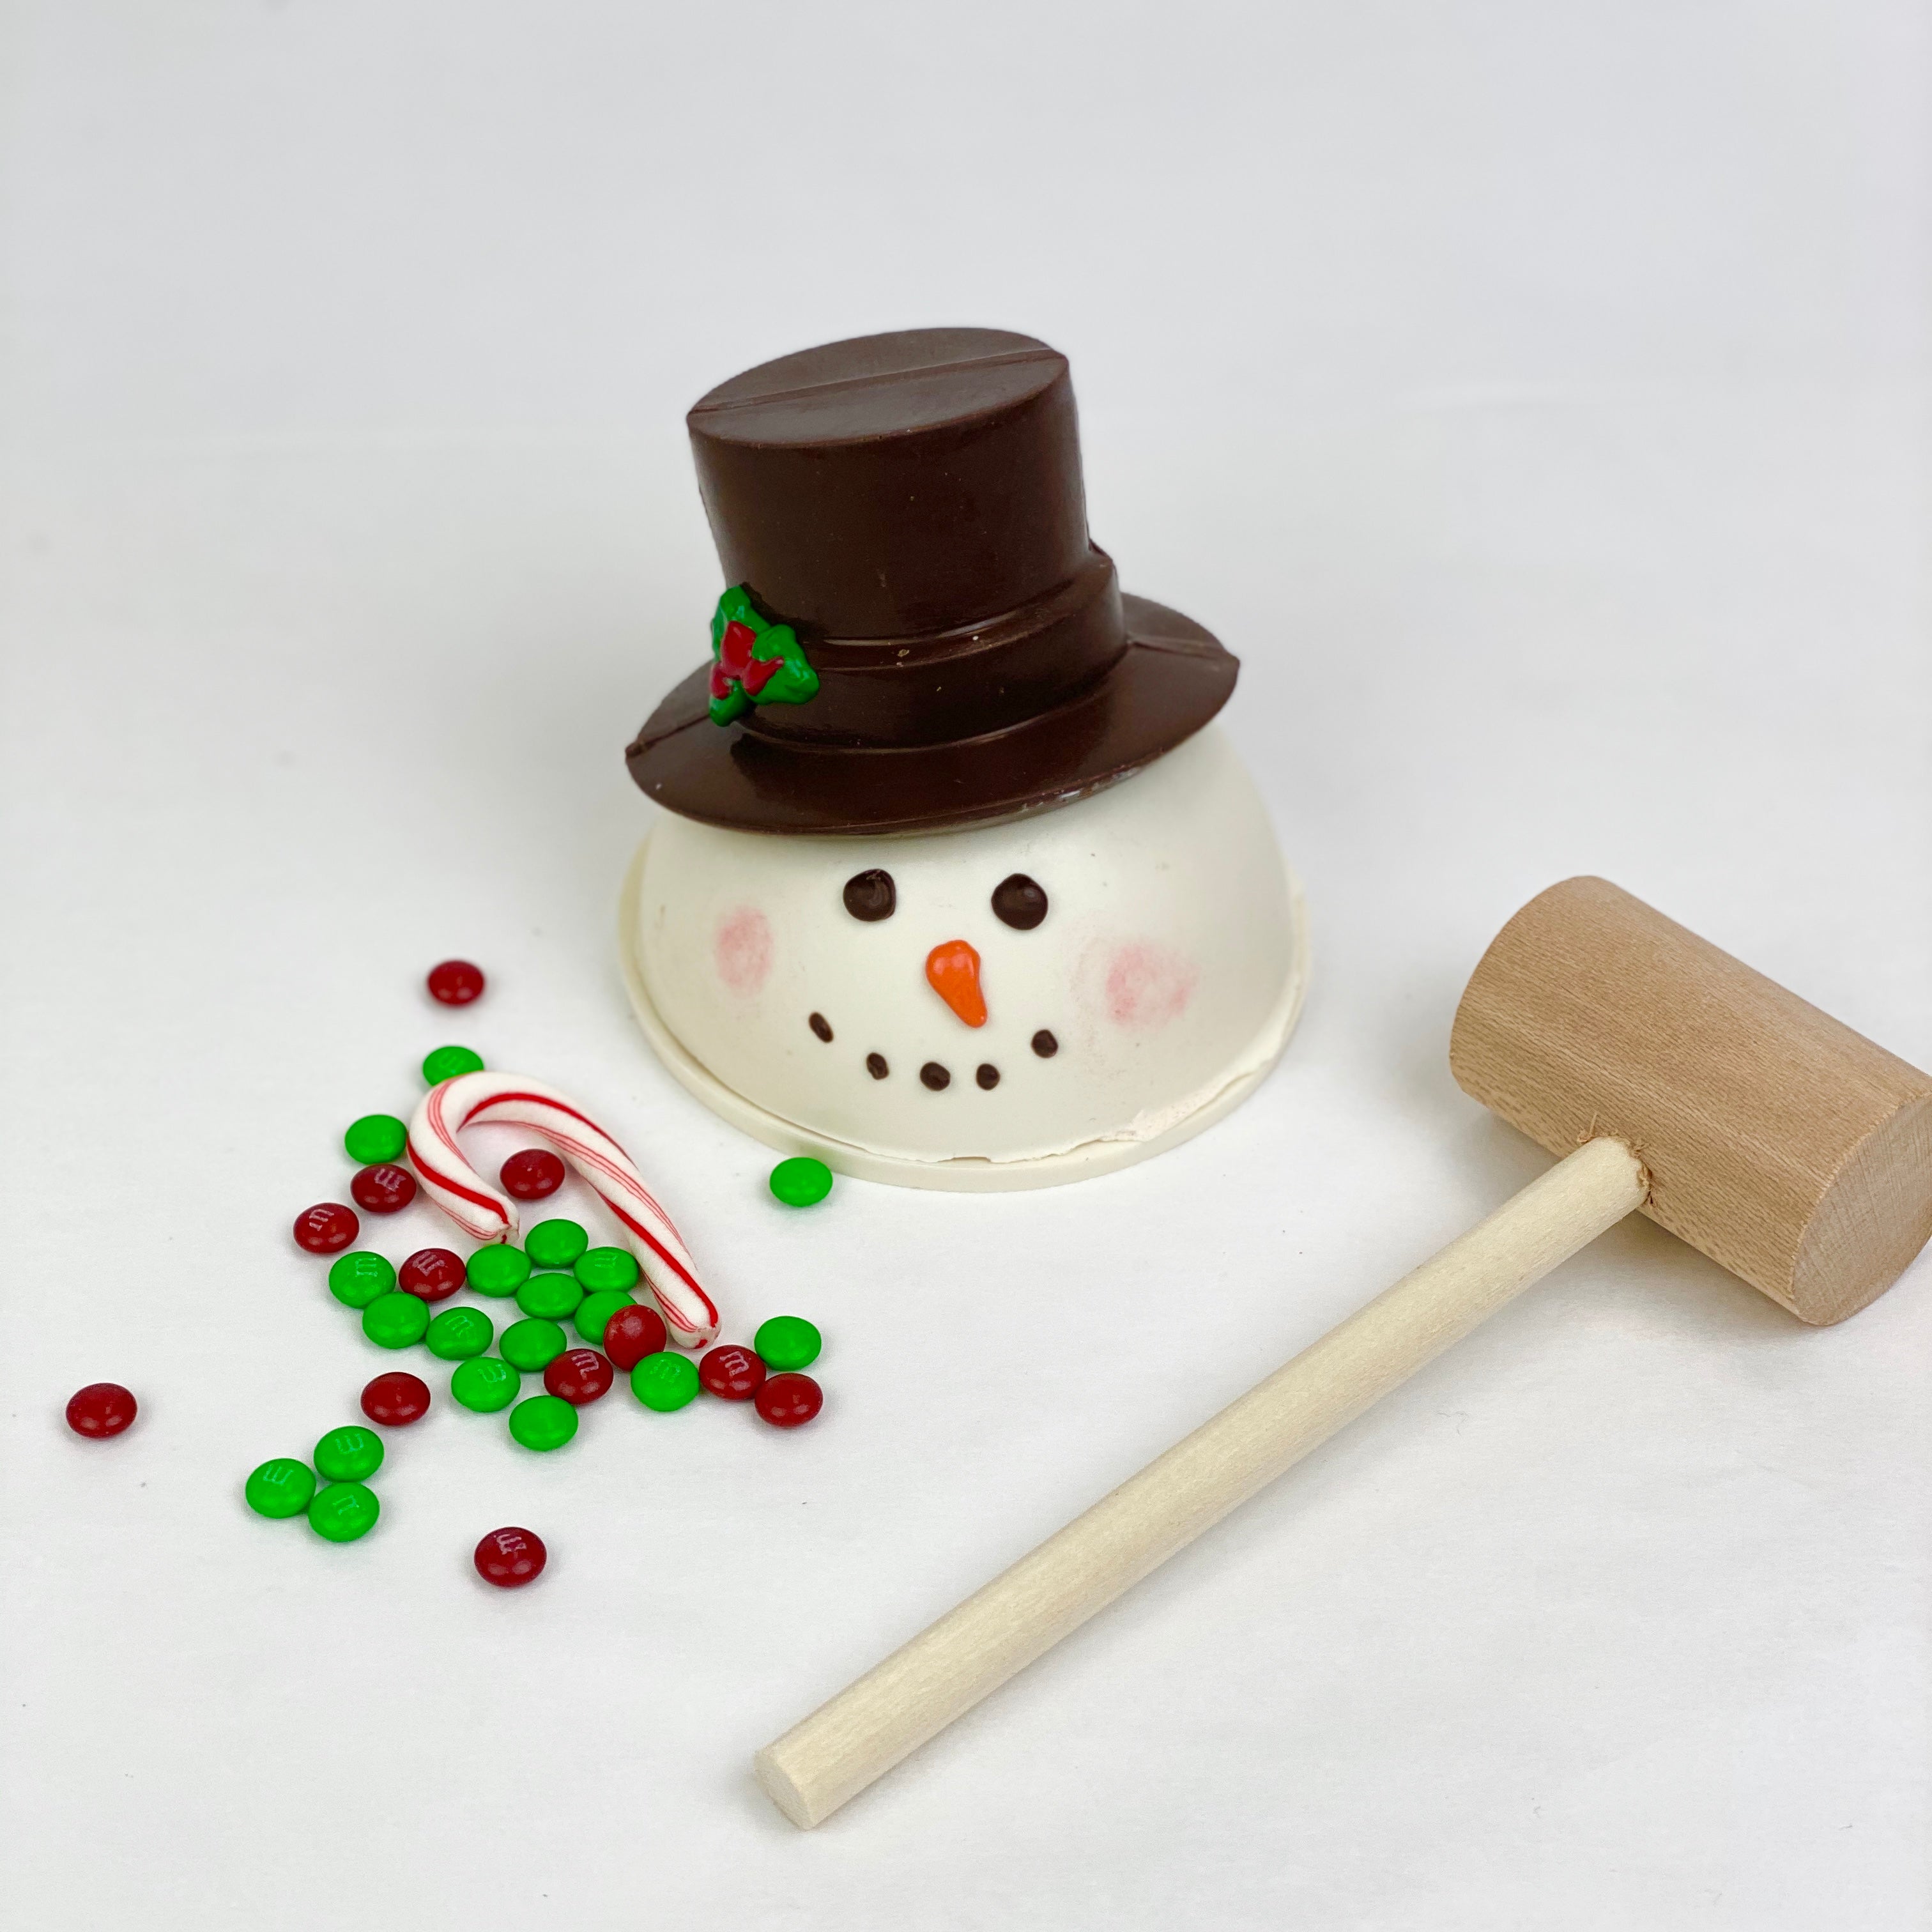 Snowman Chocolate Pinata, red and green M&Ms, candy cane and a mallet